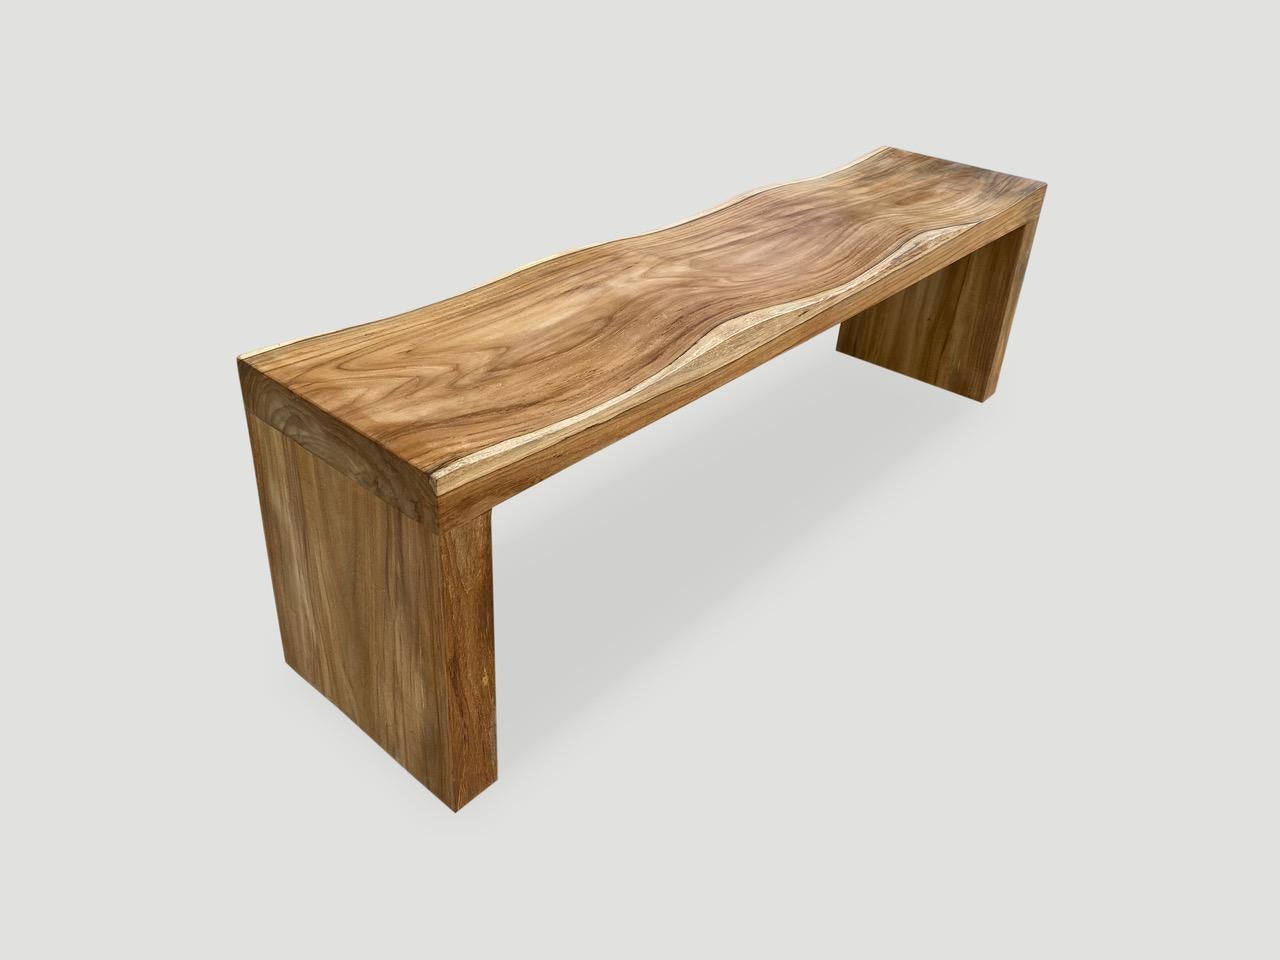 The teak wood wave bench represents a sleek, modern aesthetic, designed to provide comfort and durability. A solid single slab of reclaimed teak wood is hand carved into a wave design, sanded and sealed with a natural oil finish. Our modern wave